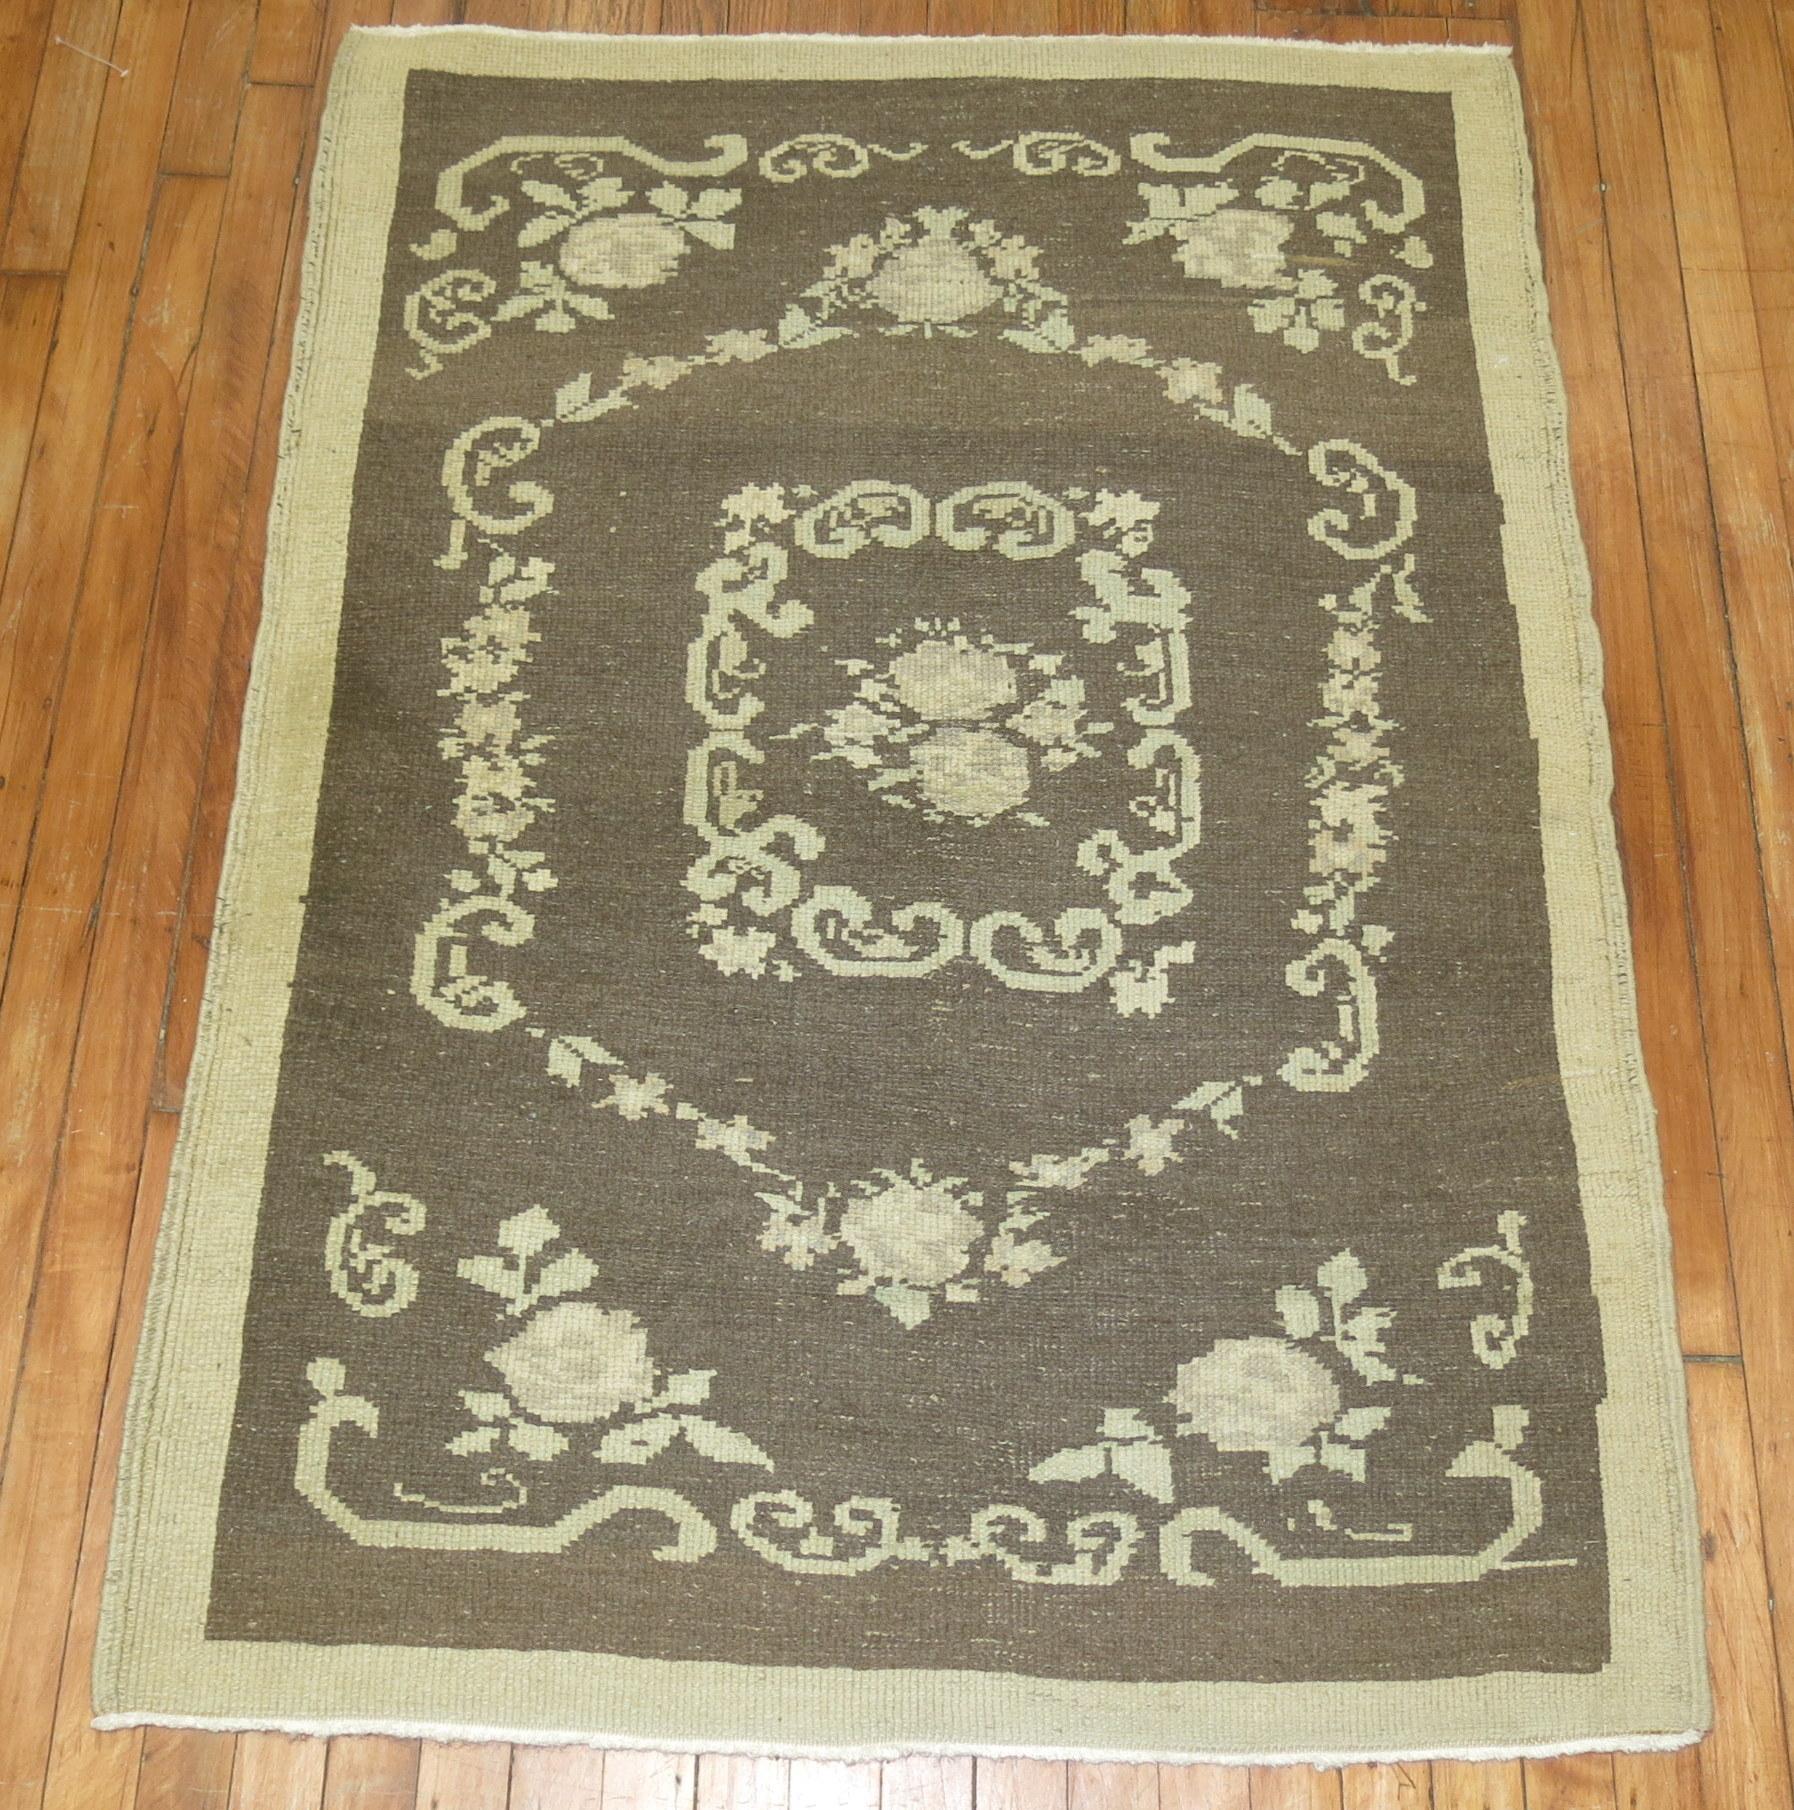 Mid-20th century Turkish rug with a floral design with gray and cream accents.

Measures: 3'4